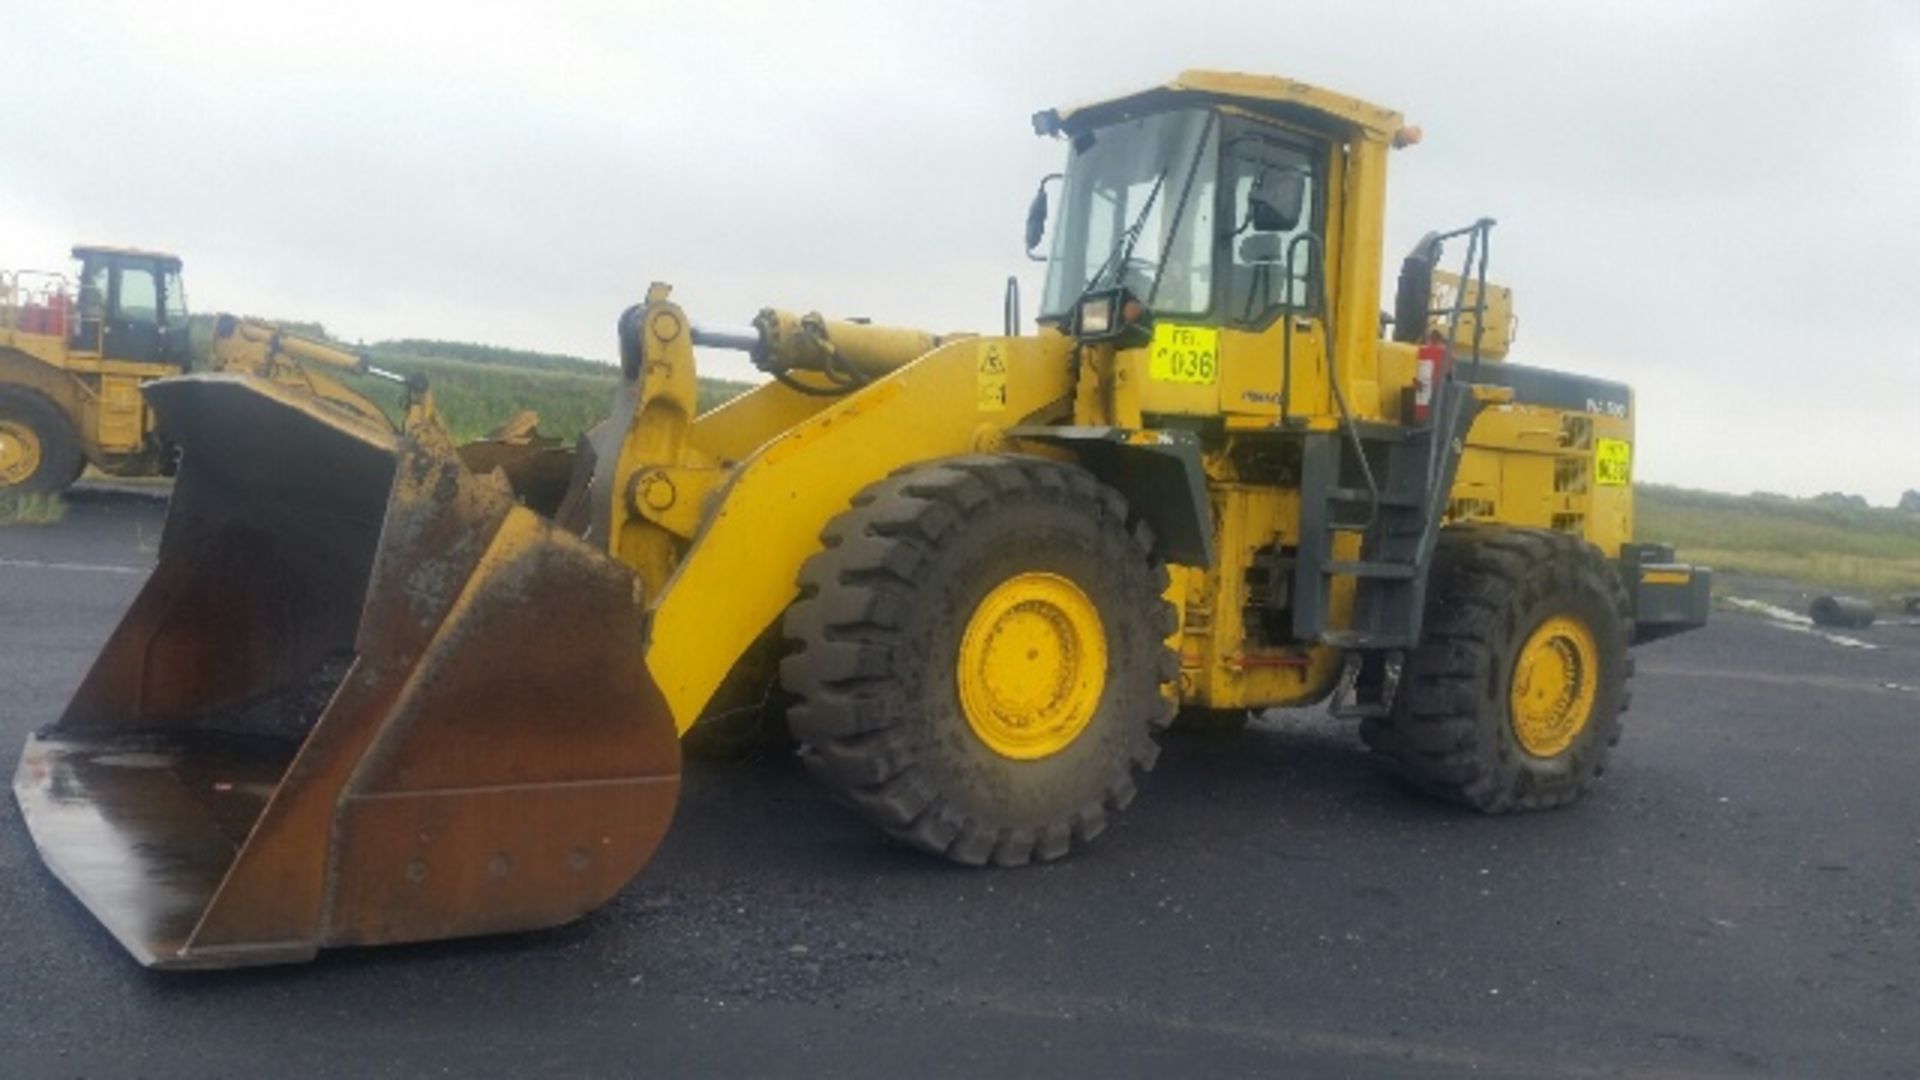 2000 KOMATSU WA500-3 FRONT END LOADER- SERIAL:50778 (LOCATED AT GLENCORE WITCONS COLLIERY) - Image 2 of 8